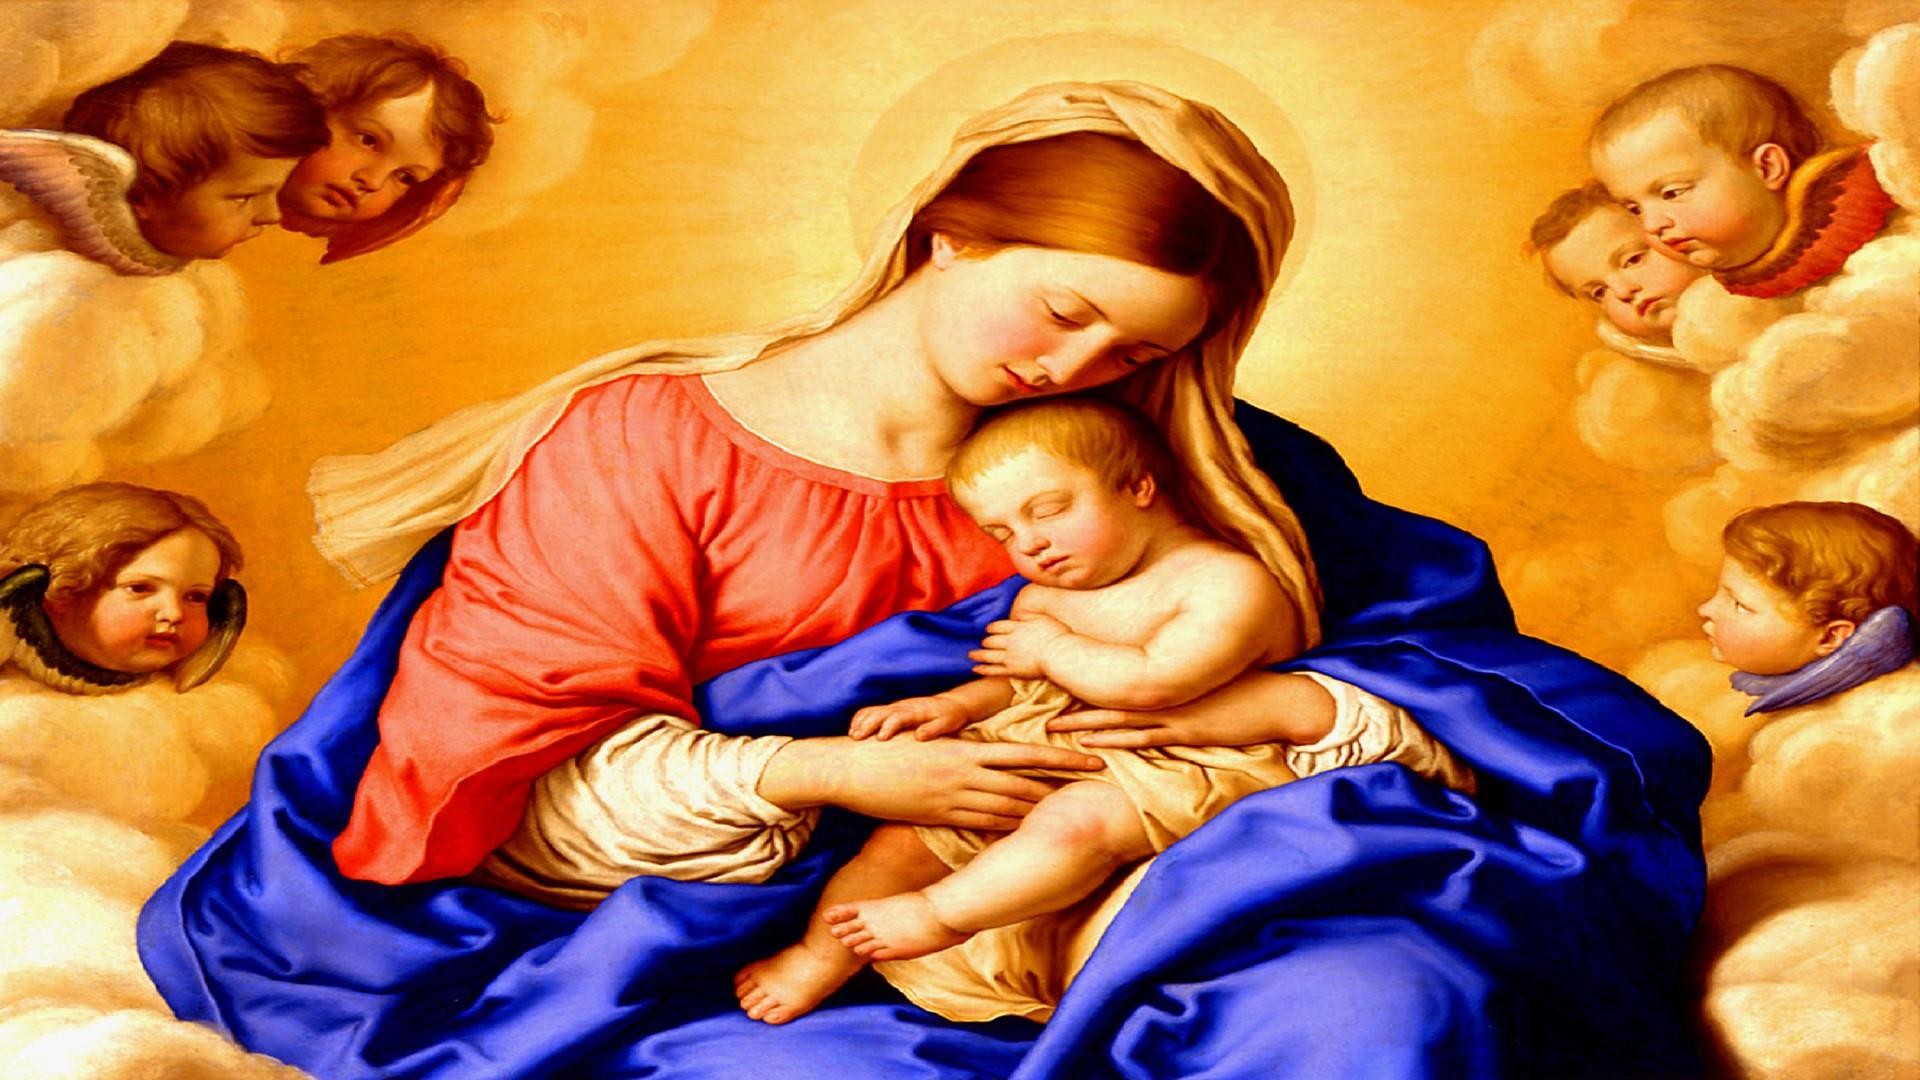 jesus christ mother mary wallpapers 1933x2555 for xiaomi on jesus mother mary wallpapers